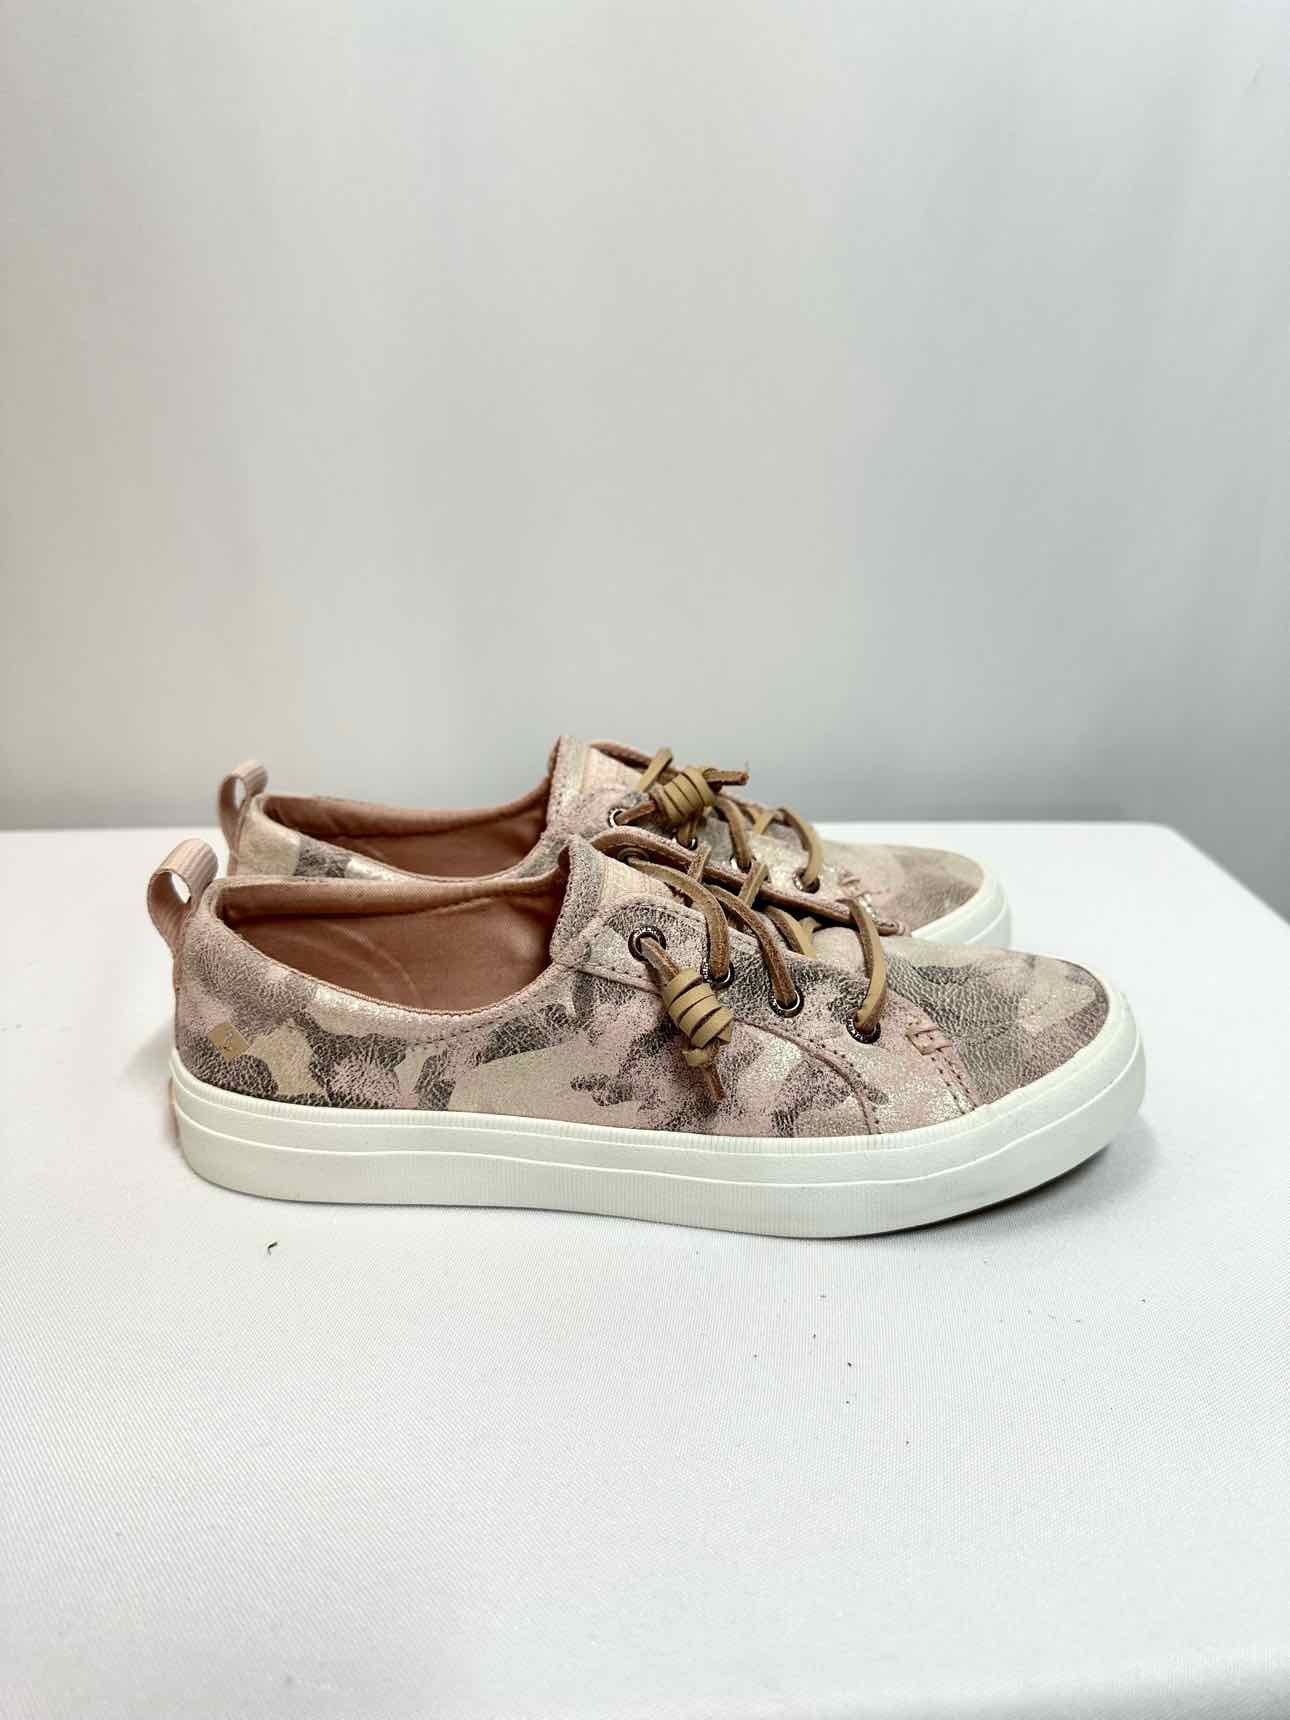 Sperry Crest Vibe Pink Camo Sneakers **NEW**